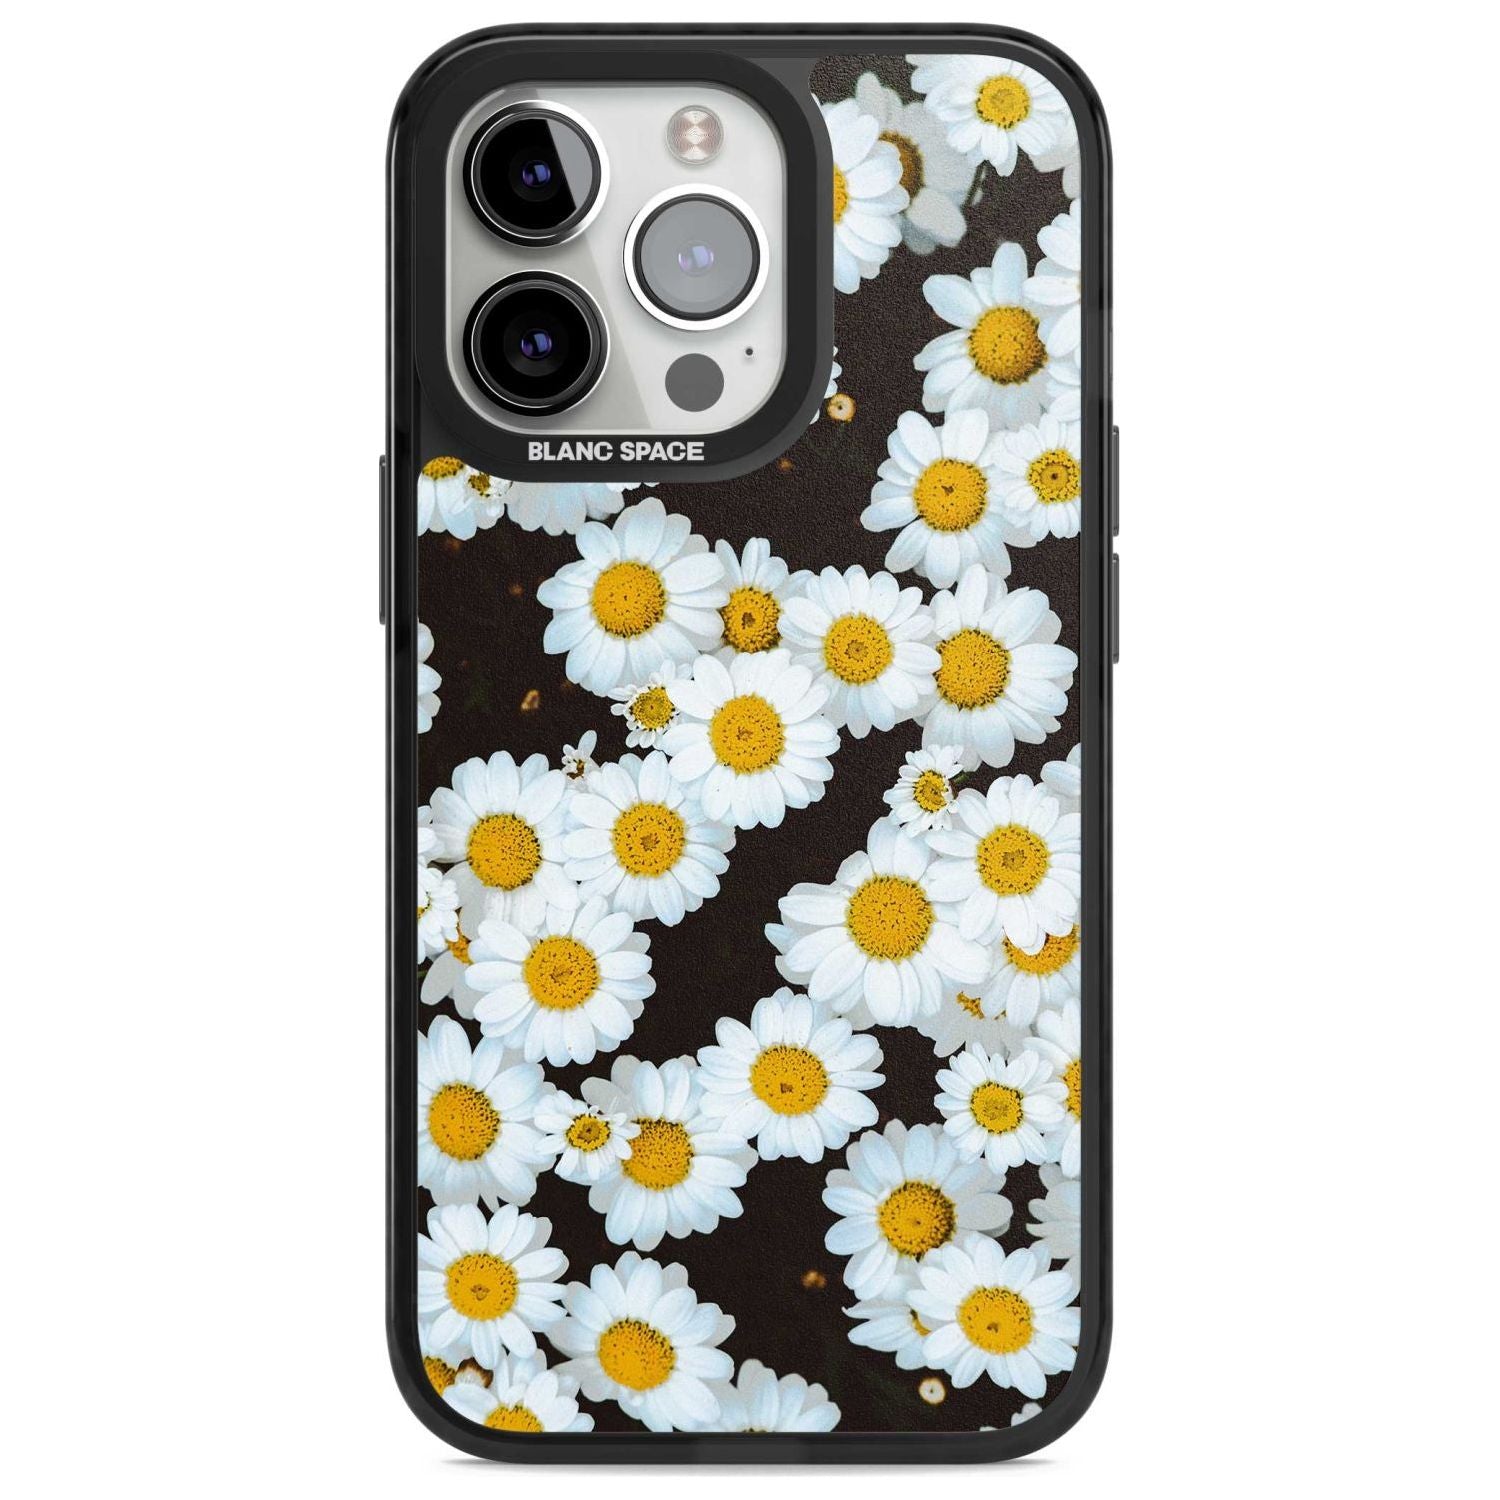 Daisies - Real Floral Photographs Phone Case iPhone 15 Pro Max / Magsafe Black Impact Case,iPhone 15 Pro / Magsafe Black Impact Case,iPhone 14 Pro Max / Magsafe Black Impact Case,iPhone 14 Pro / Magsafe Black Impact Case,iPhone 13 Pro / Magsafe Black Impact Case Blanc Space